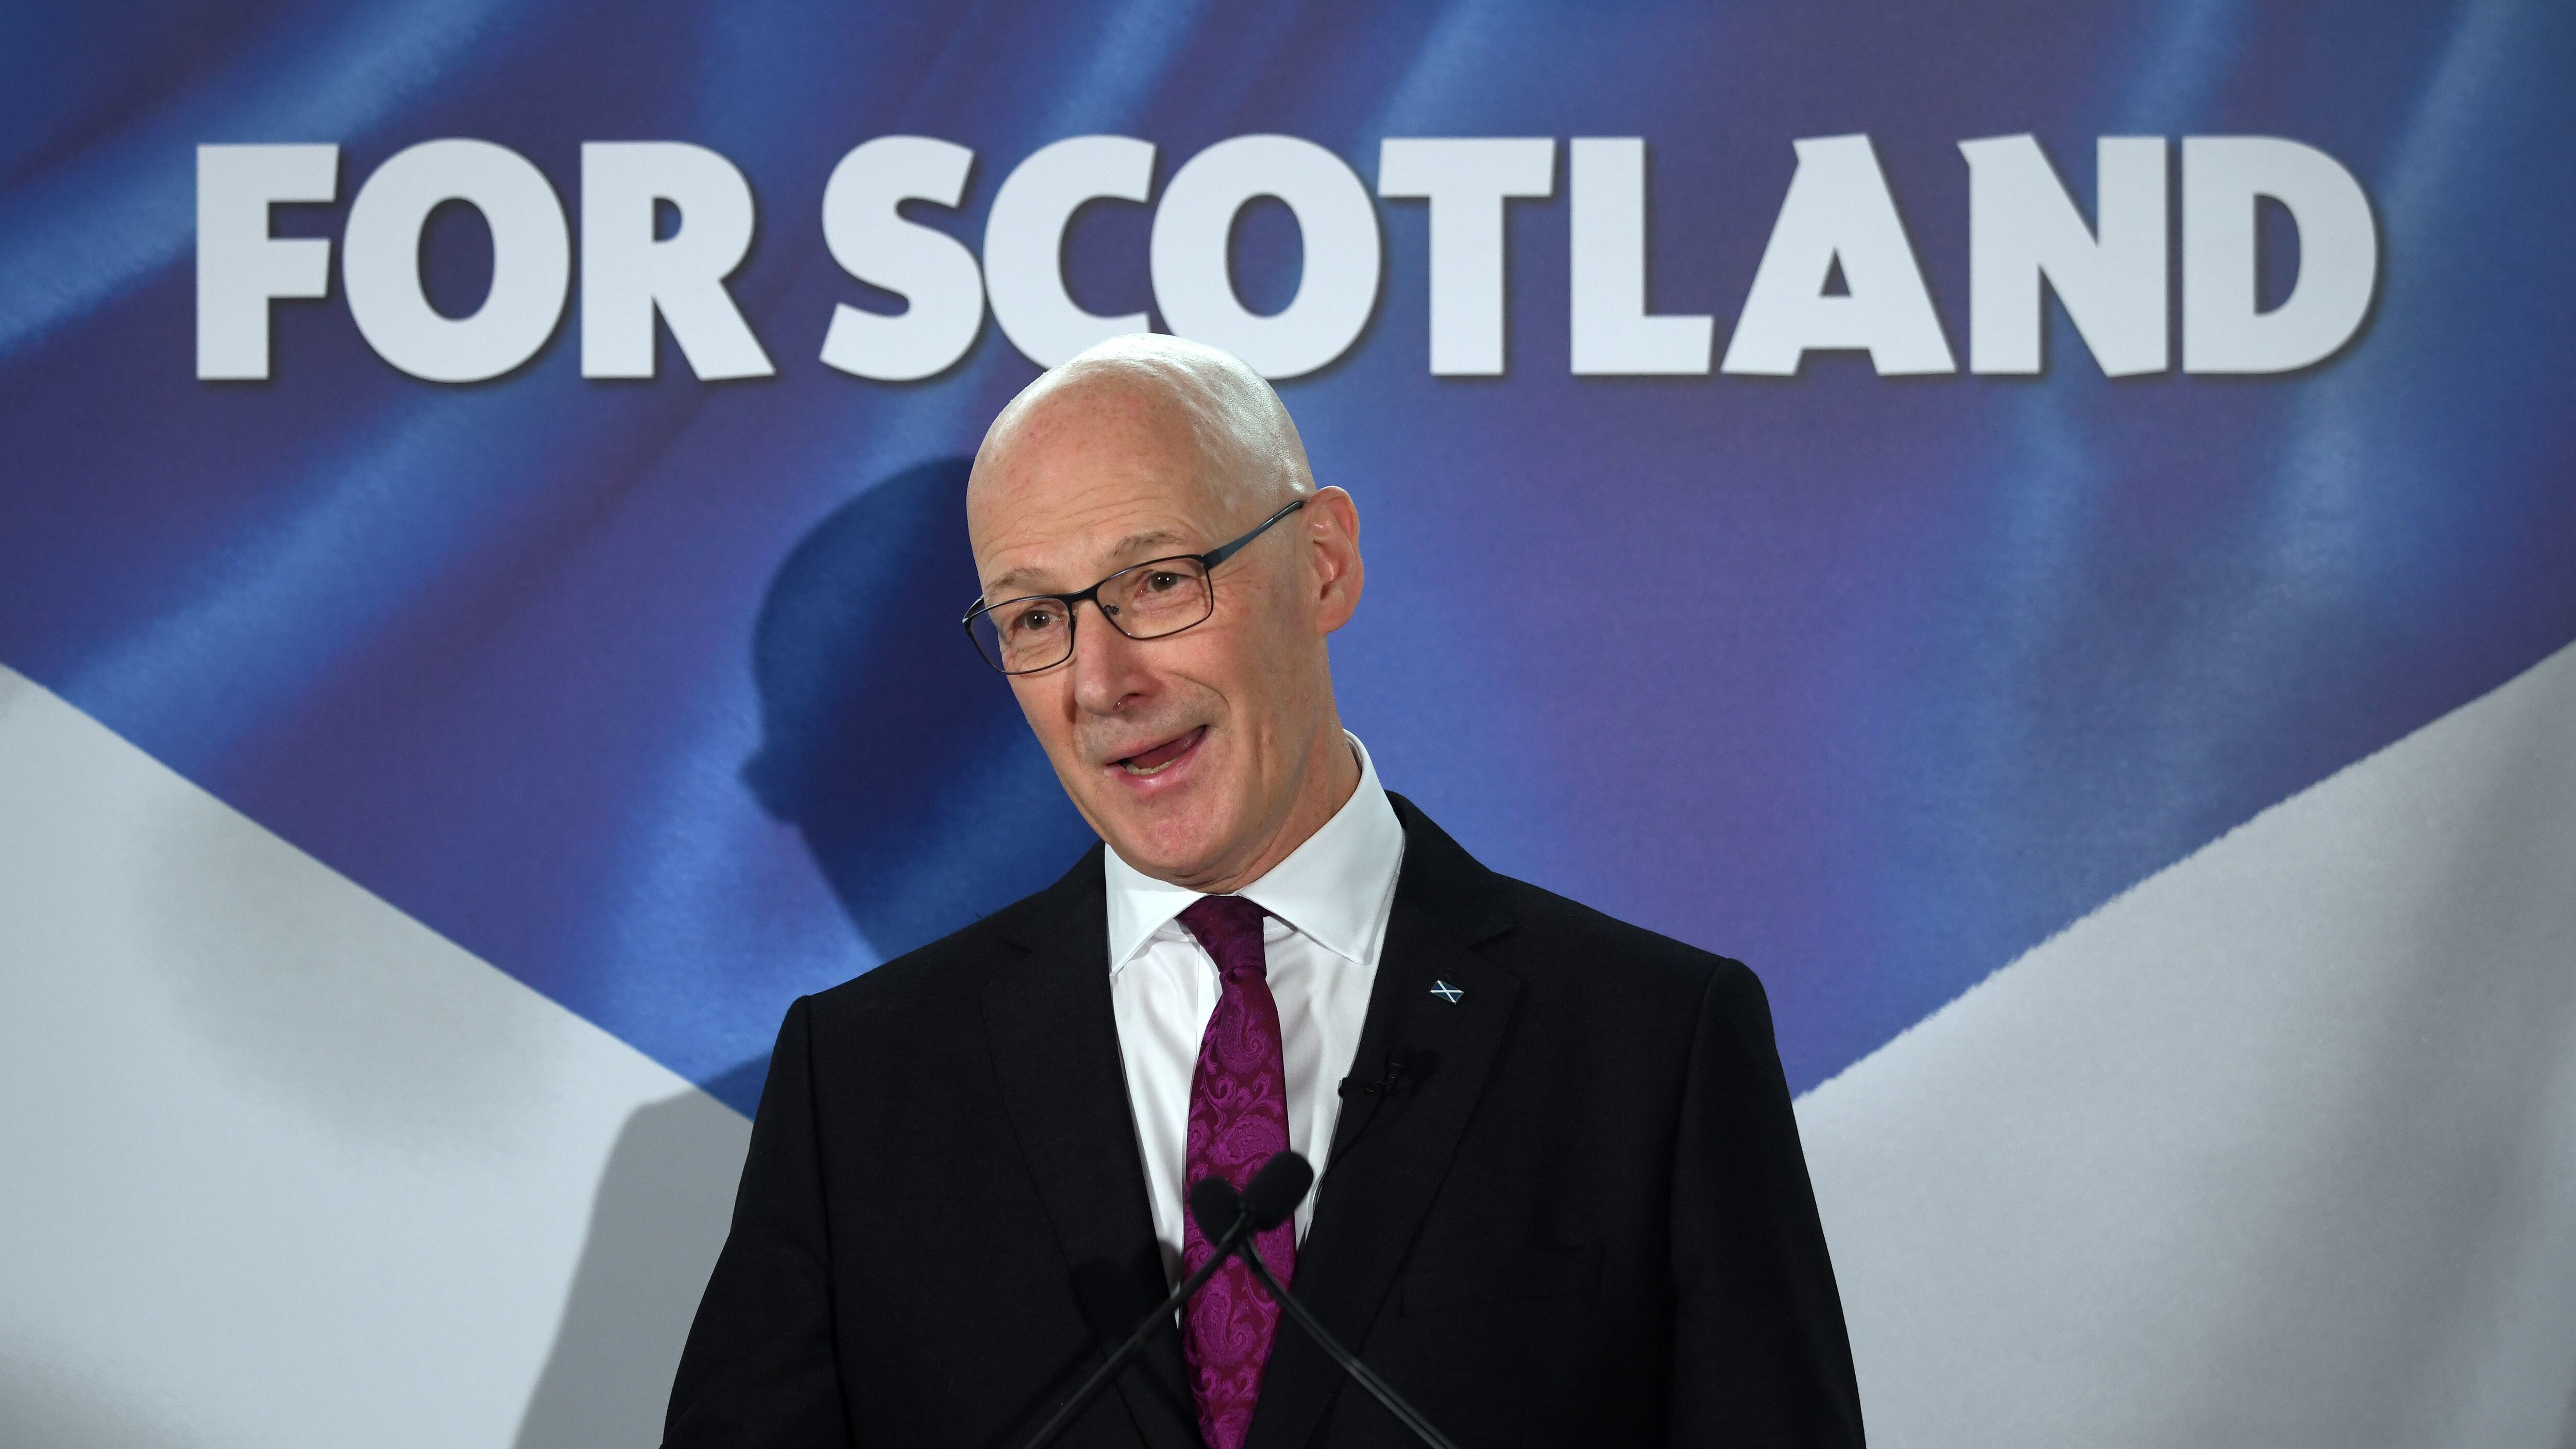 John Swinney recorded a video message to welcome Taylor Swift to Scotland